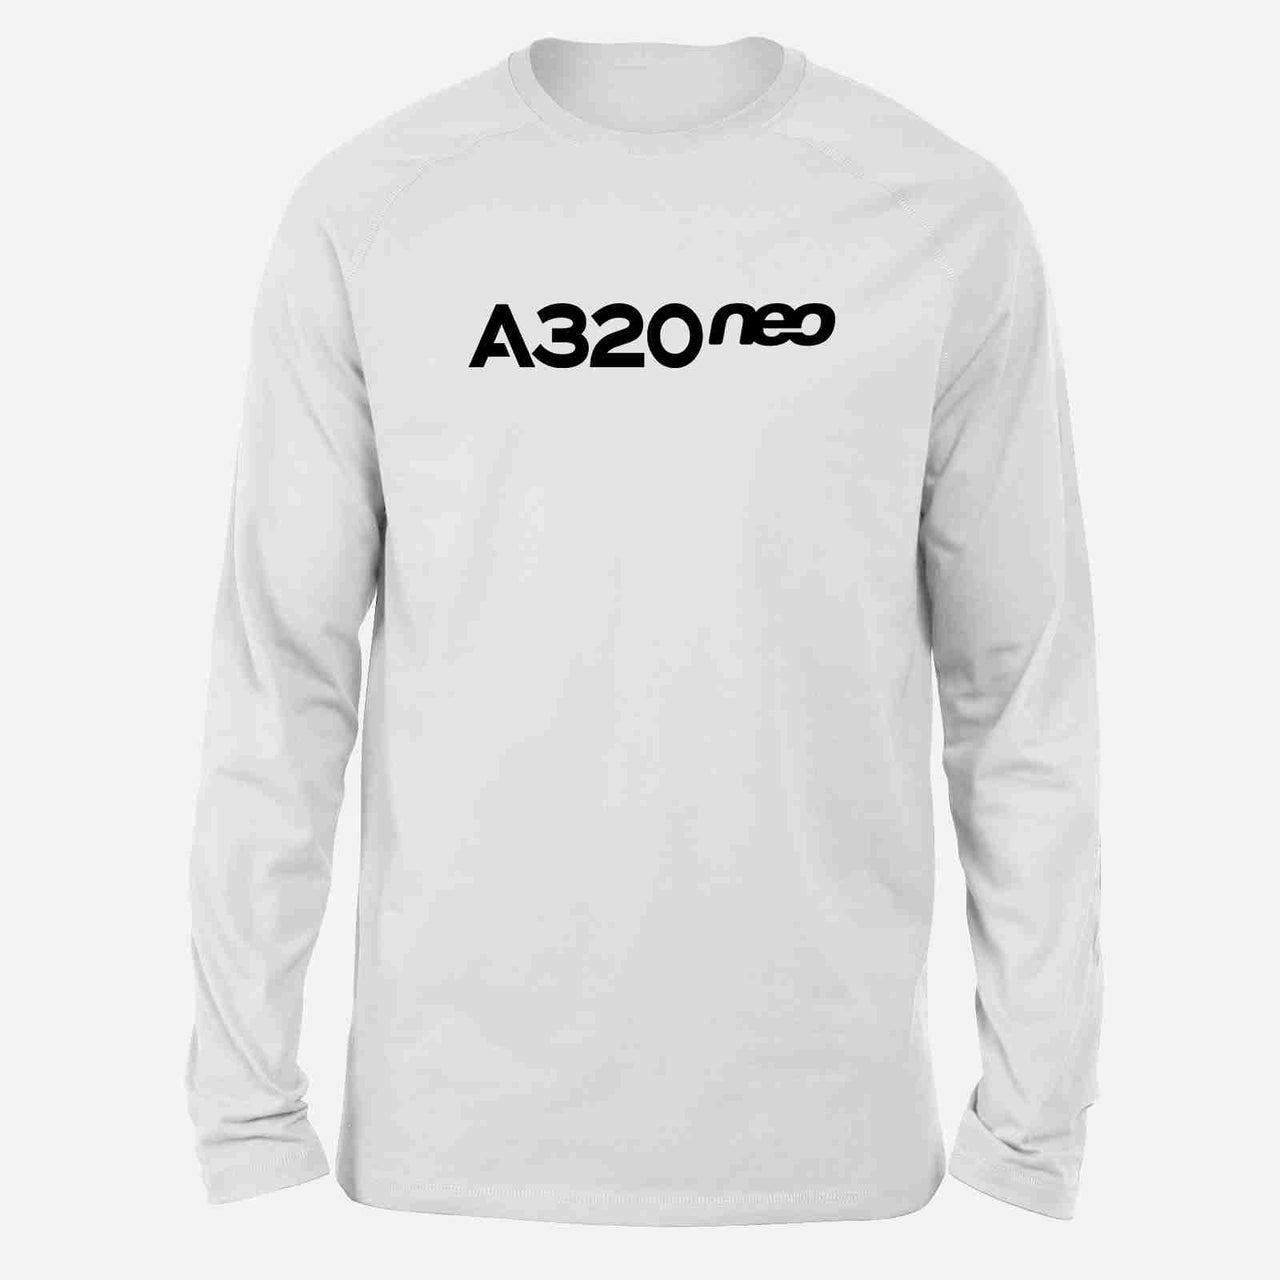 A320neo & Text Designed Long-Sleeve T-Shirts